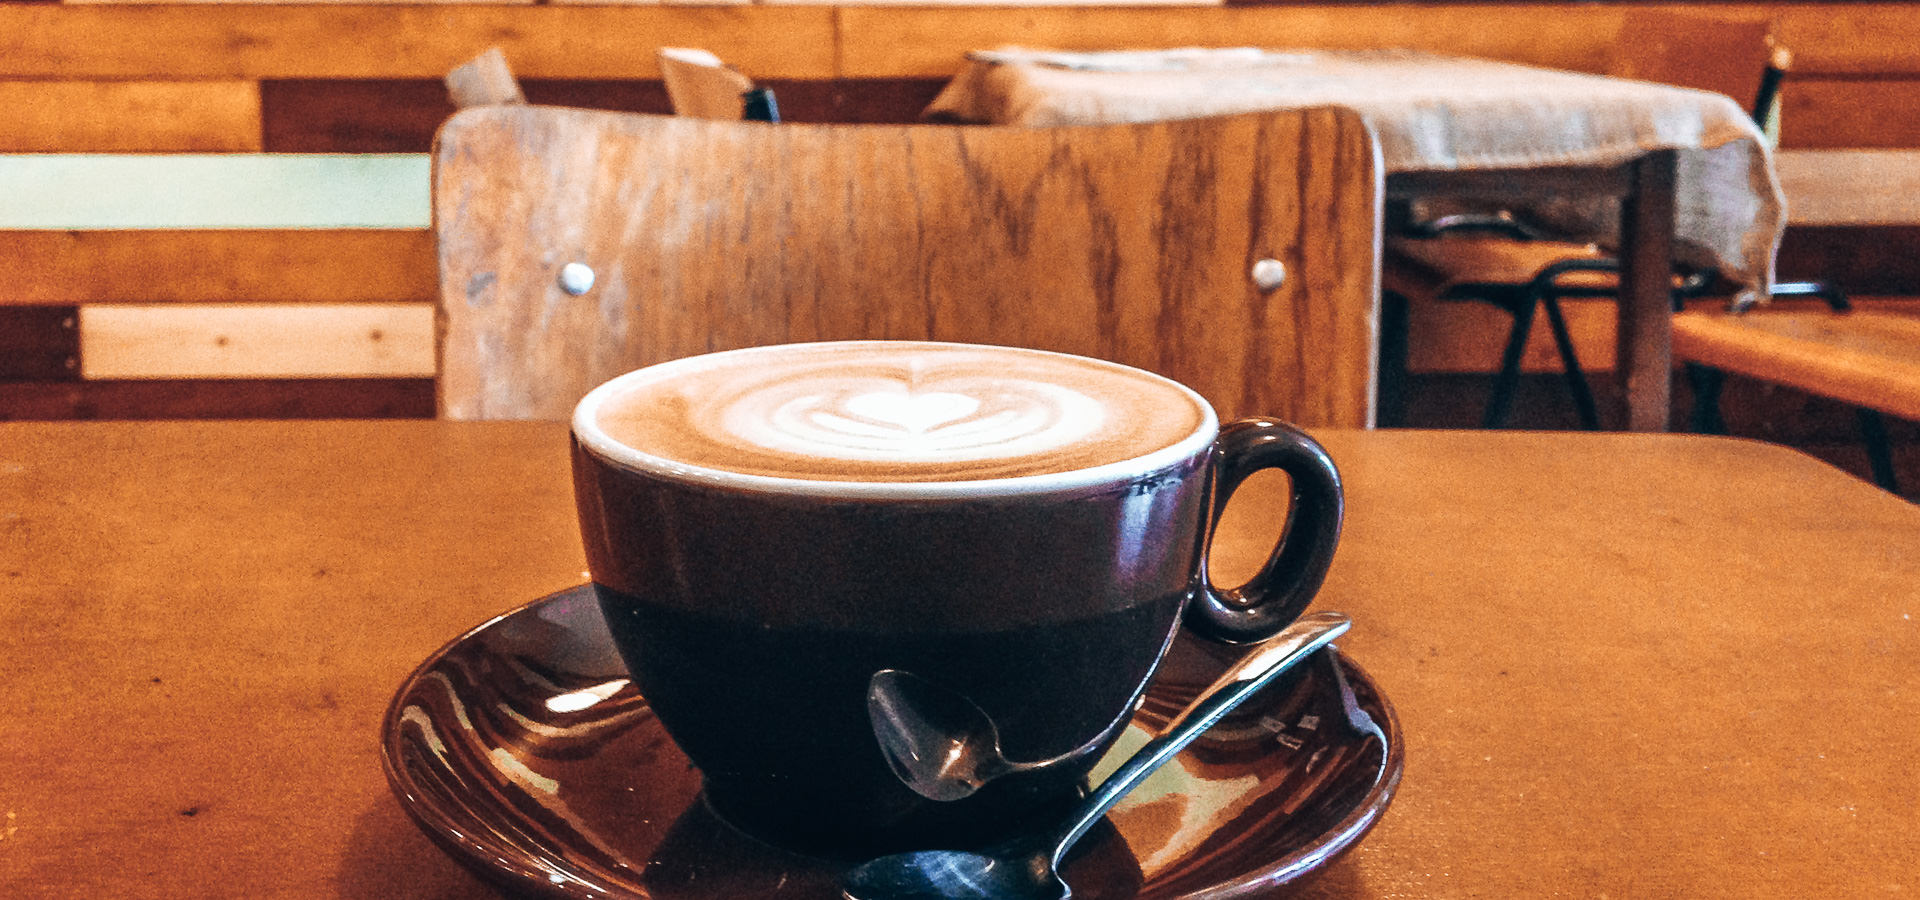 Best Specialty Coffee Amsterdam: 9 Unmissable Cafes | hidden gems in Europe 3